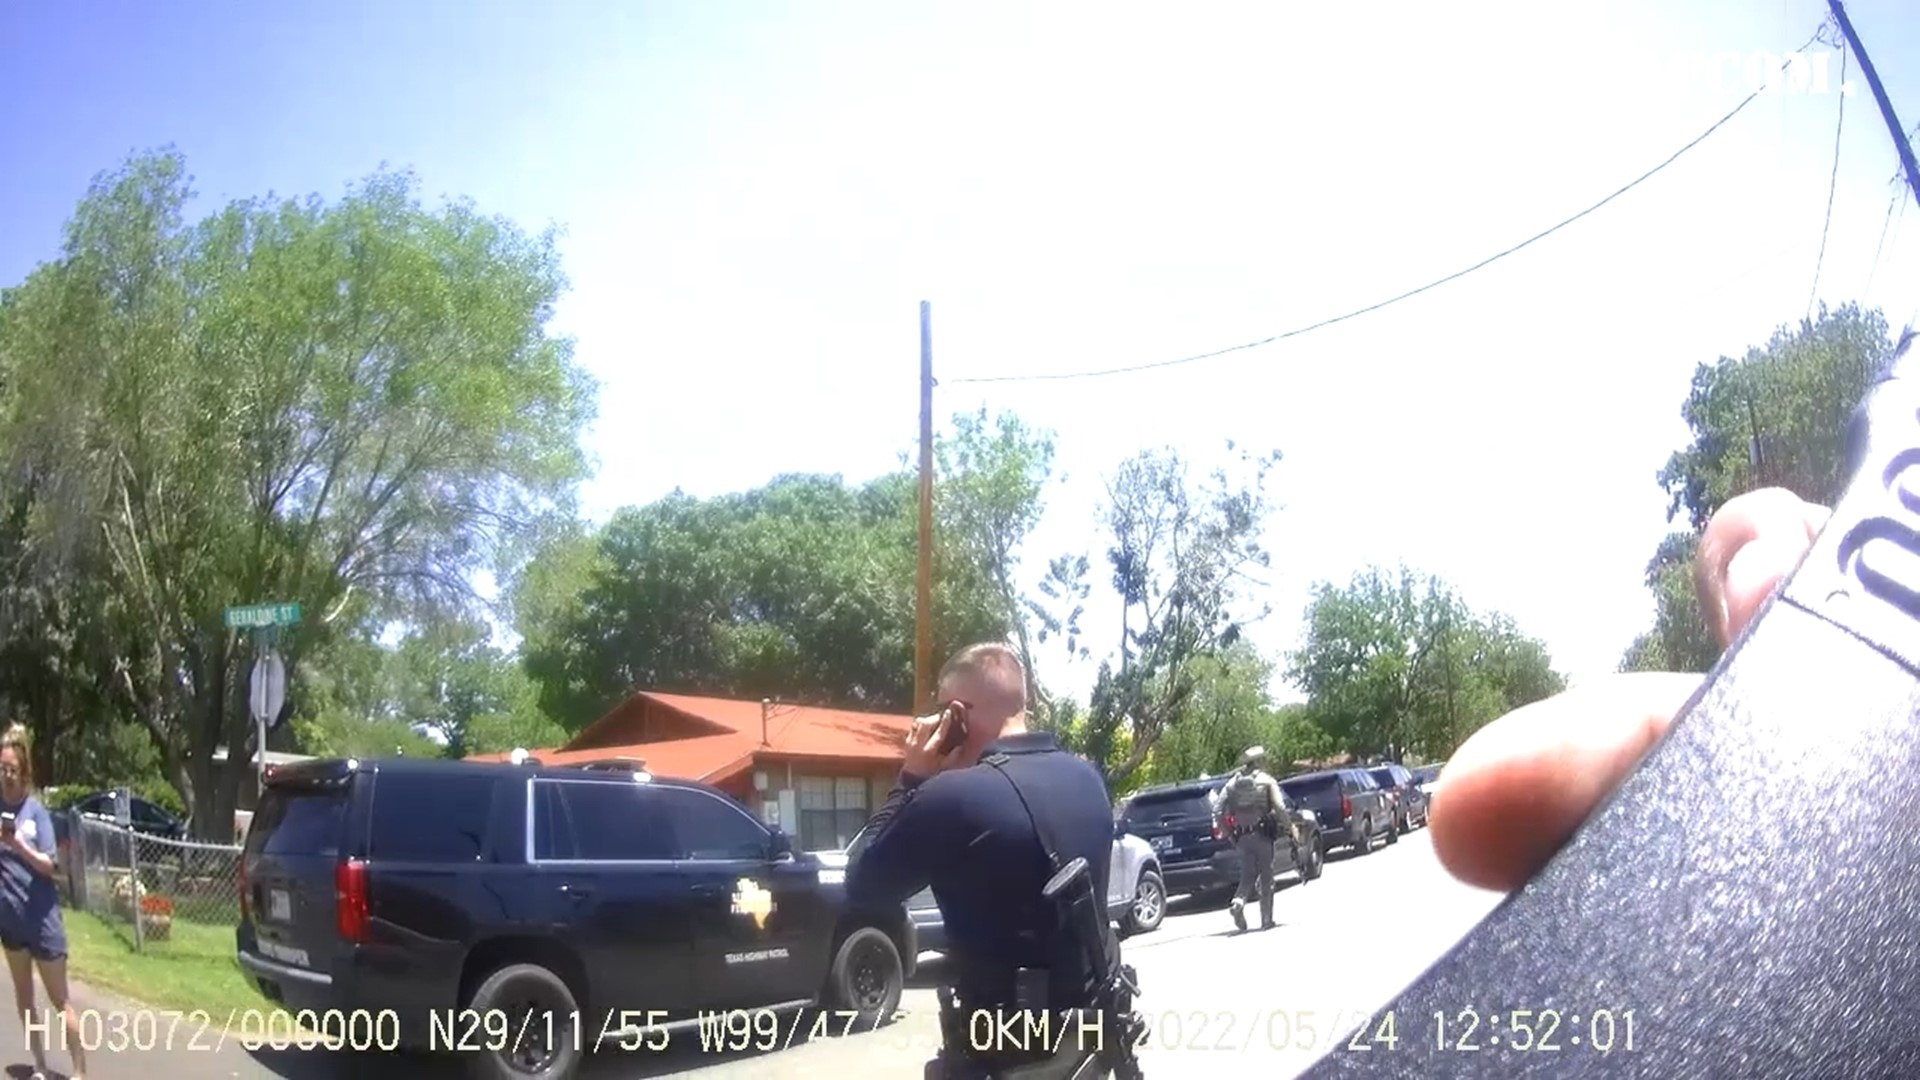 In his bodycam footage, Martinez is mostly seen directing traffic around the perimeter of the shooting scene.